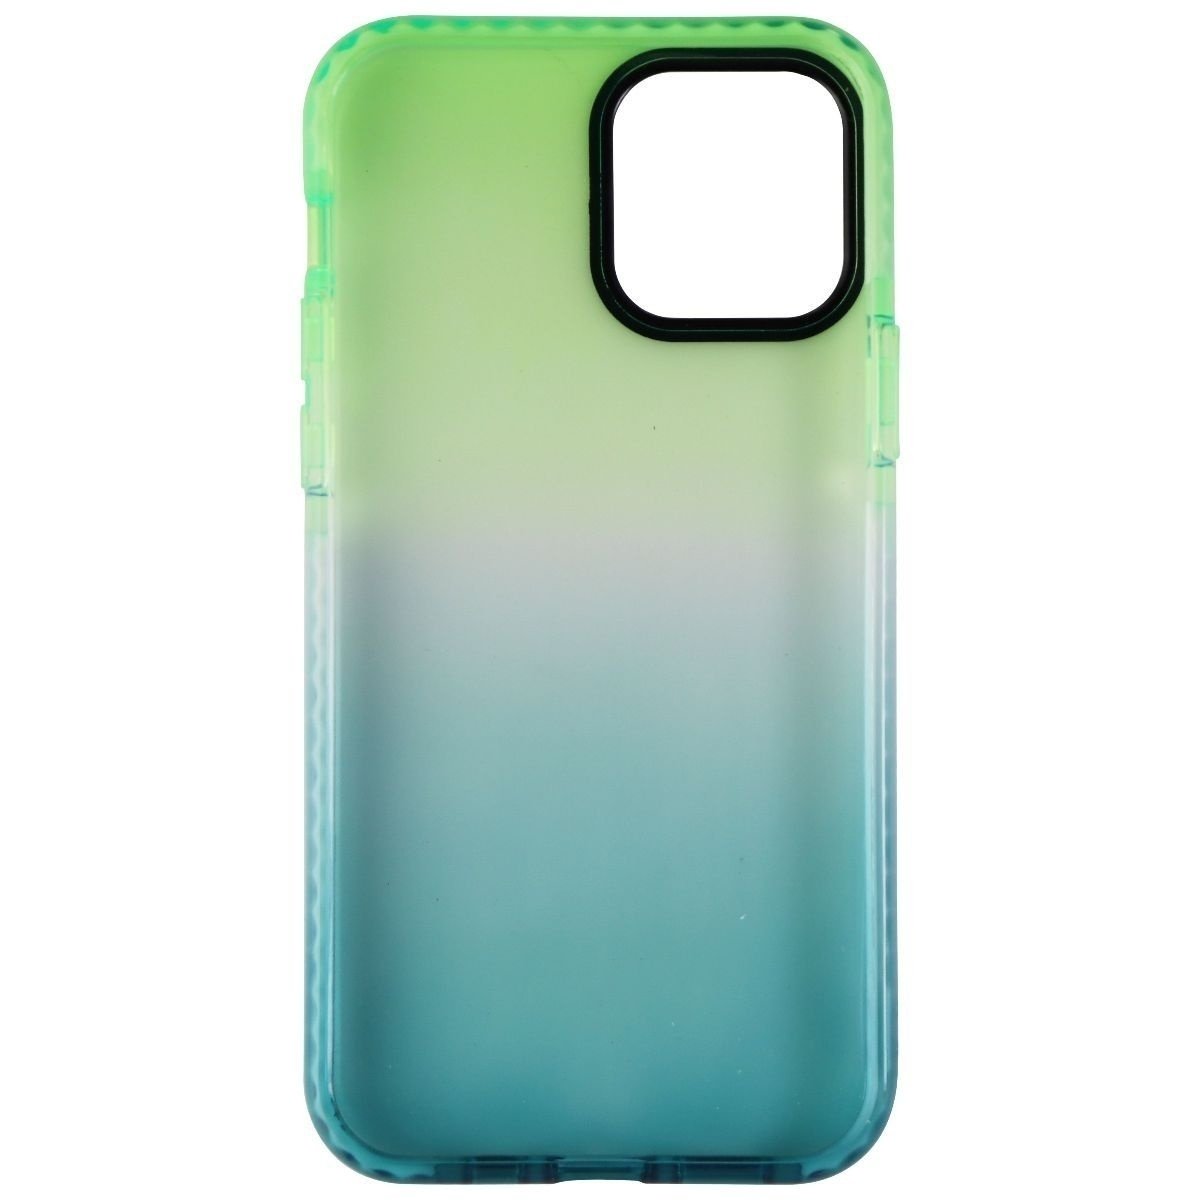 AQA Hard Protective Case For Apple IPhone 12 Pro / IPhone 12 - Clear Green Ombre